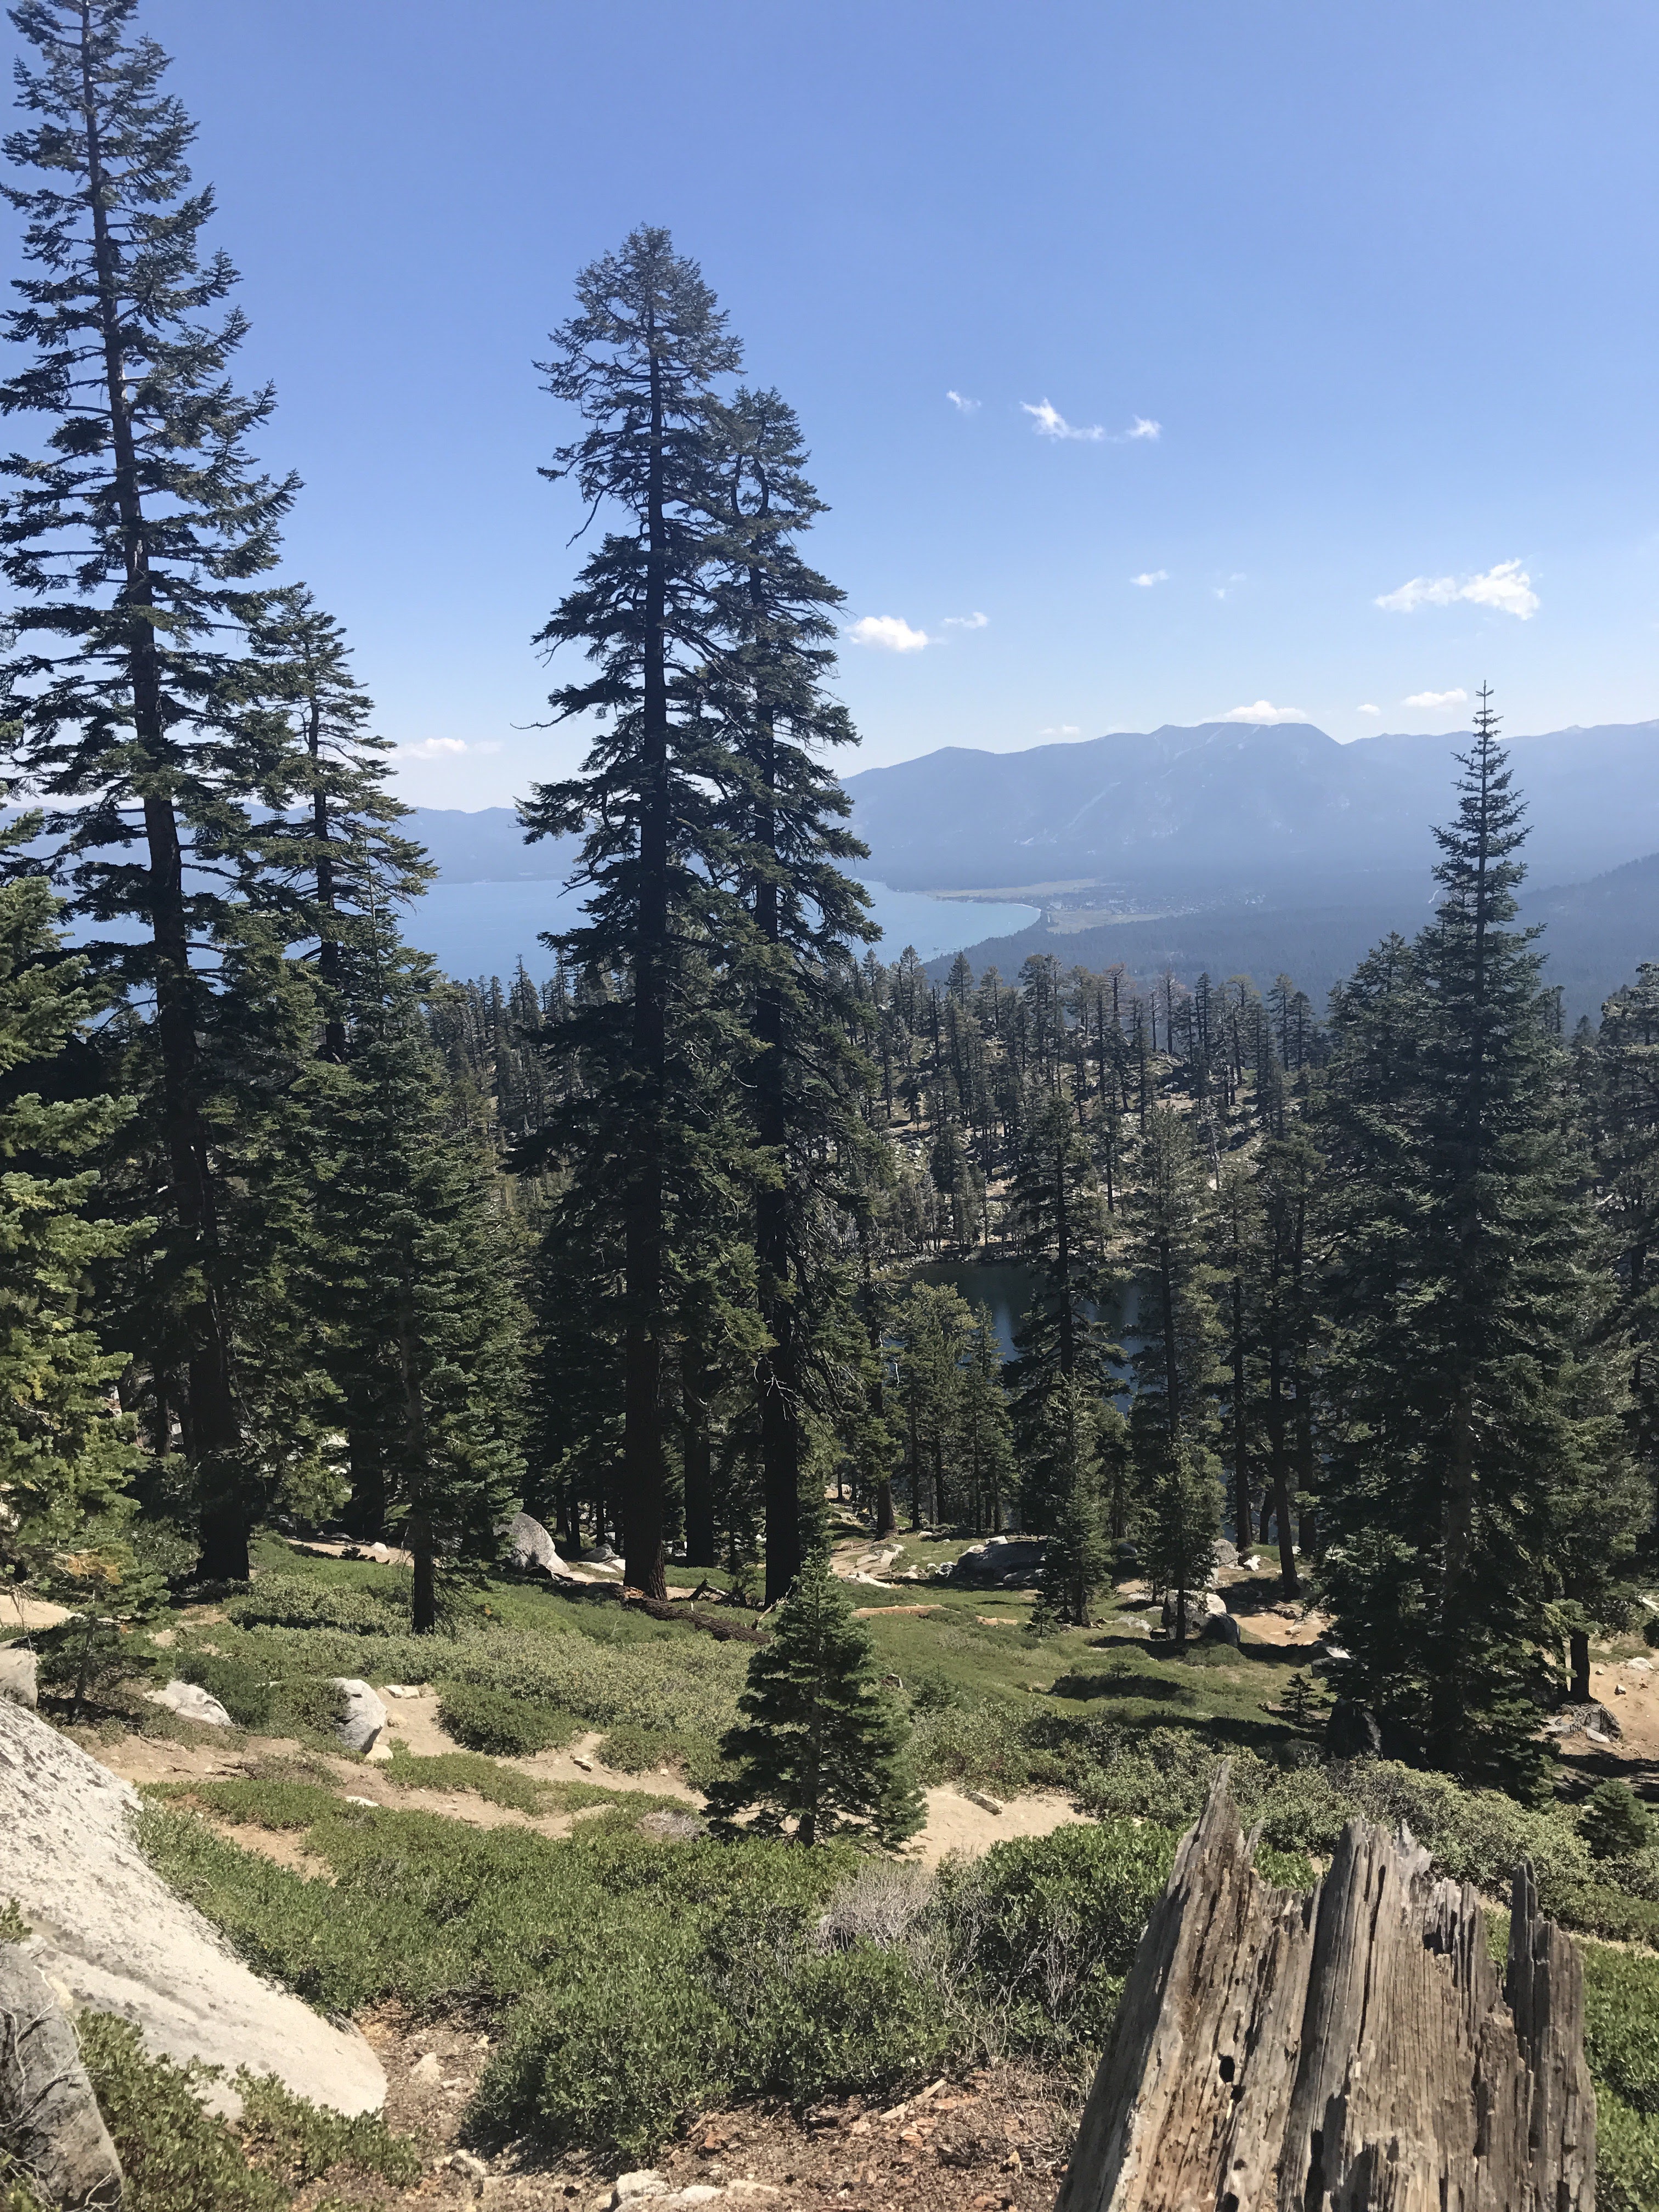 Another view of Granite Lake below, and Lake Tahoe in the distance. 8/24/2017